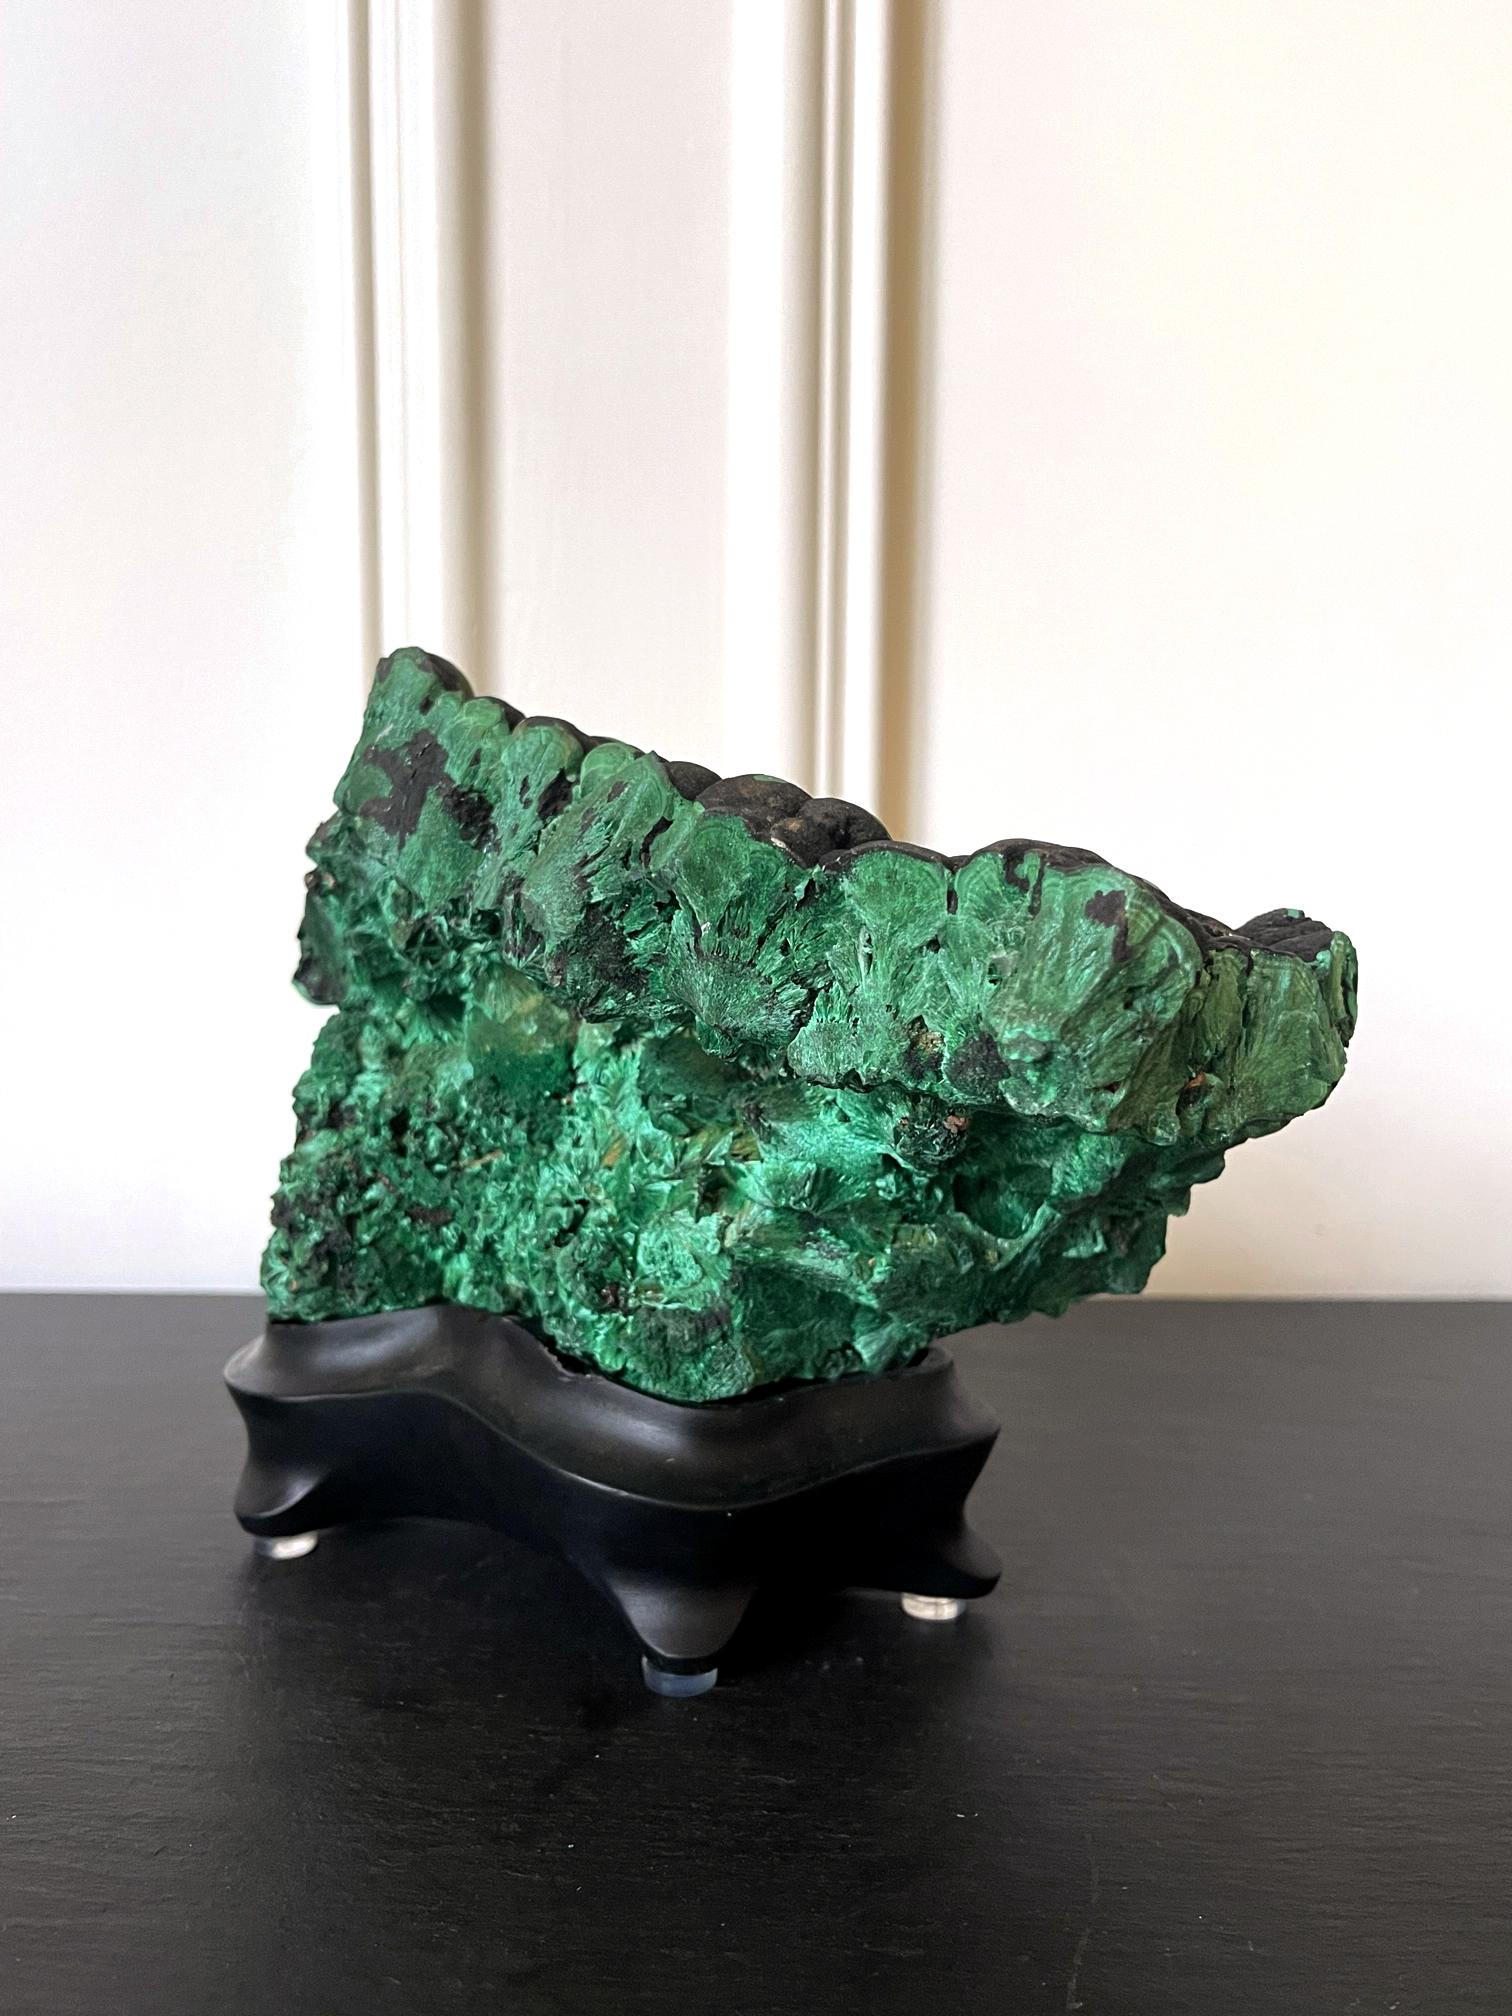 American Natural Malachite Rock on Display Stand as a Scholar Stone For Sale